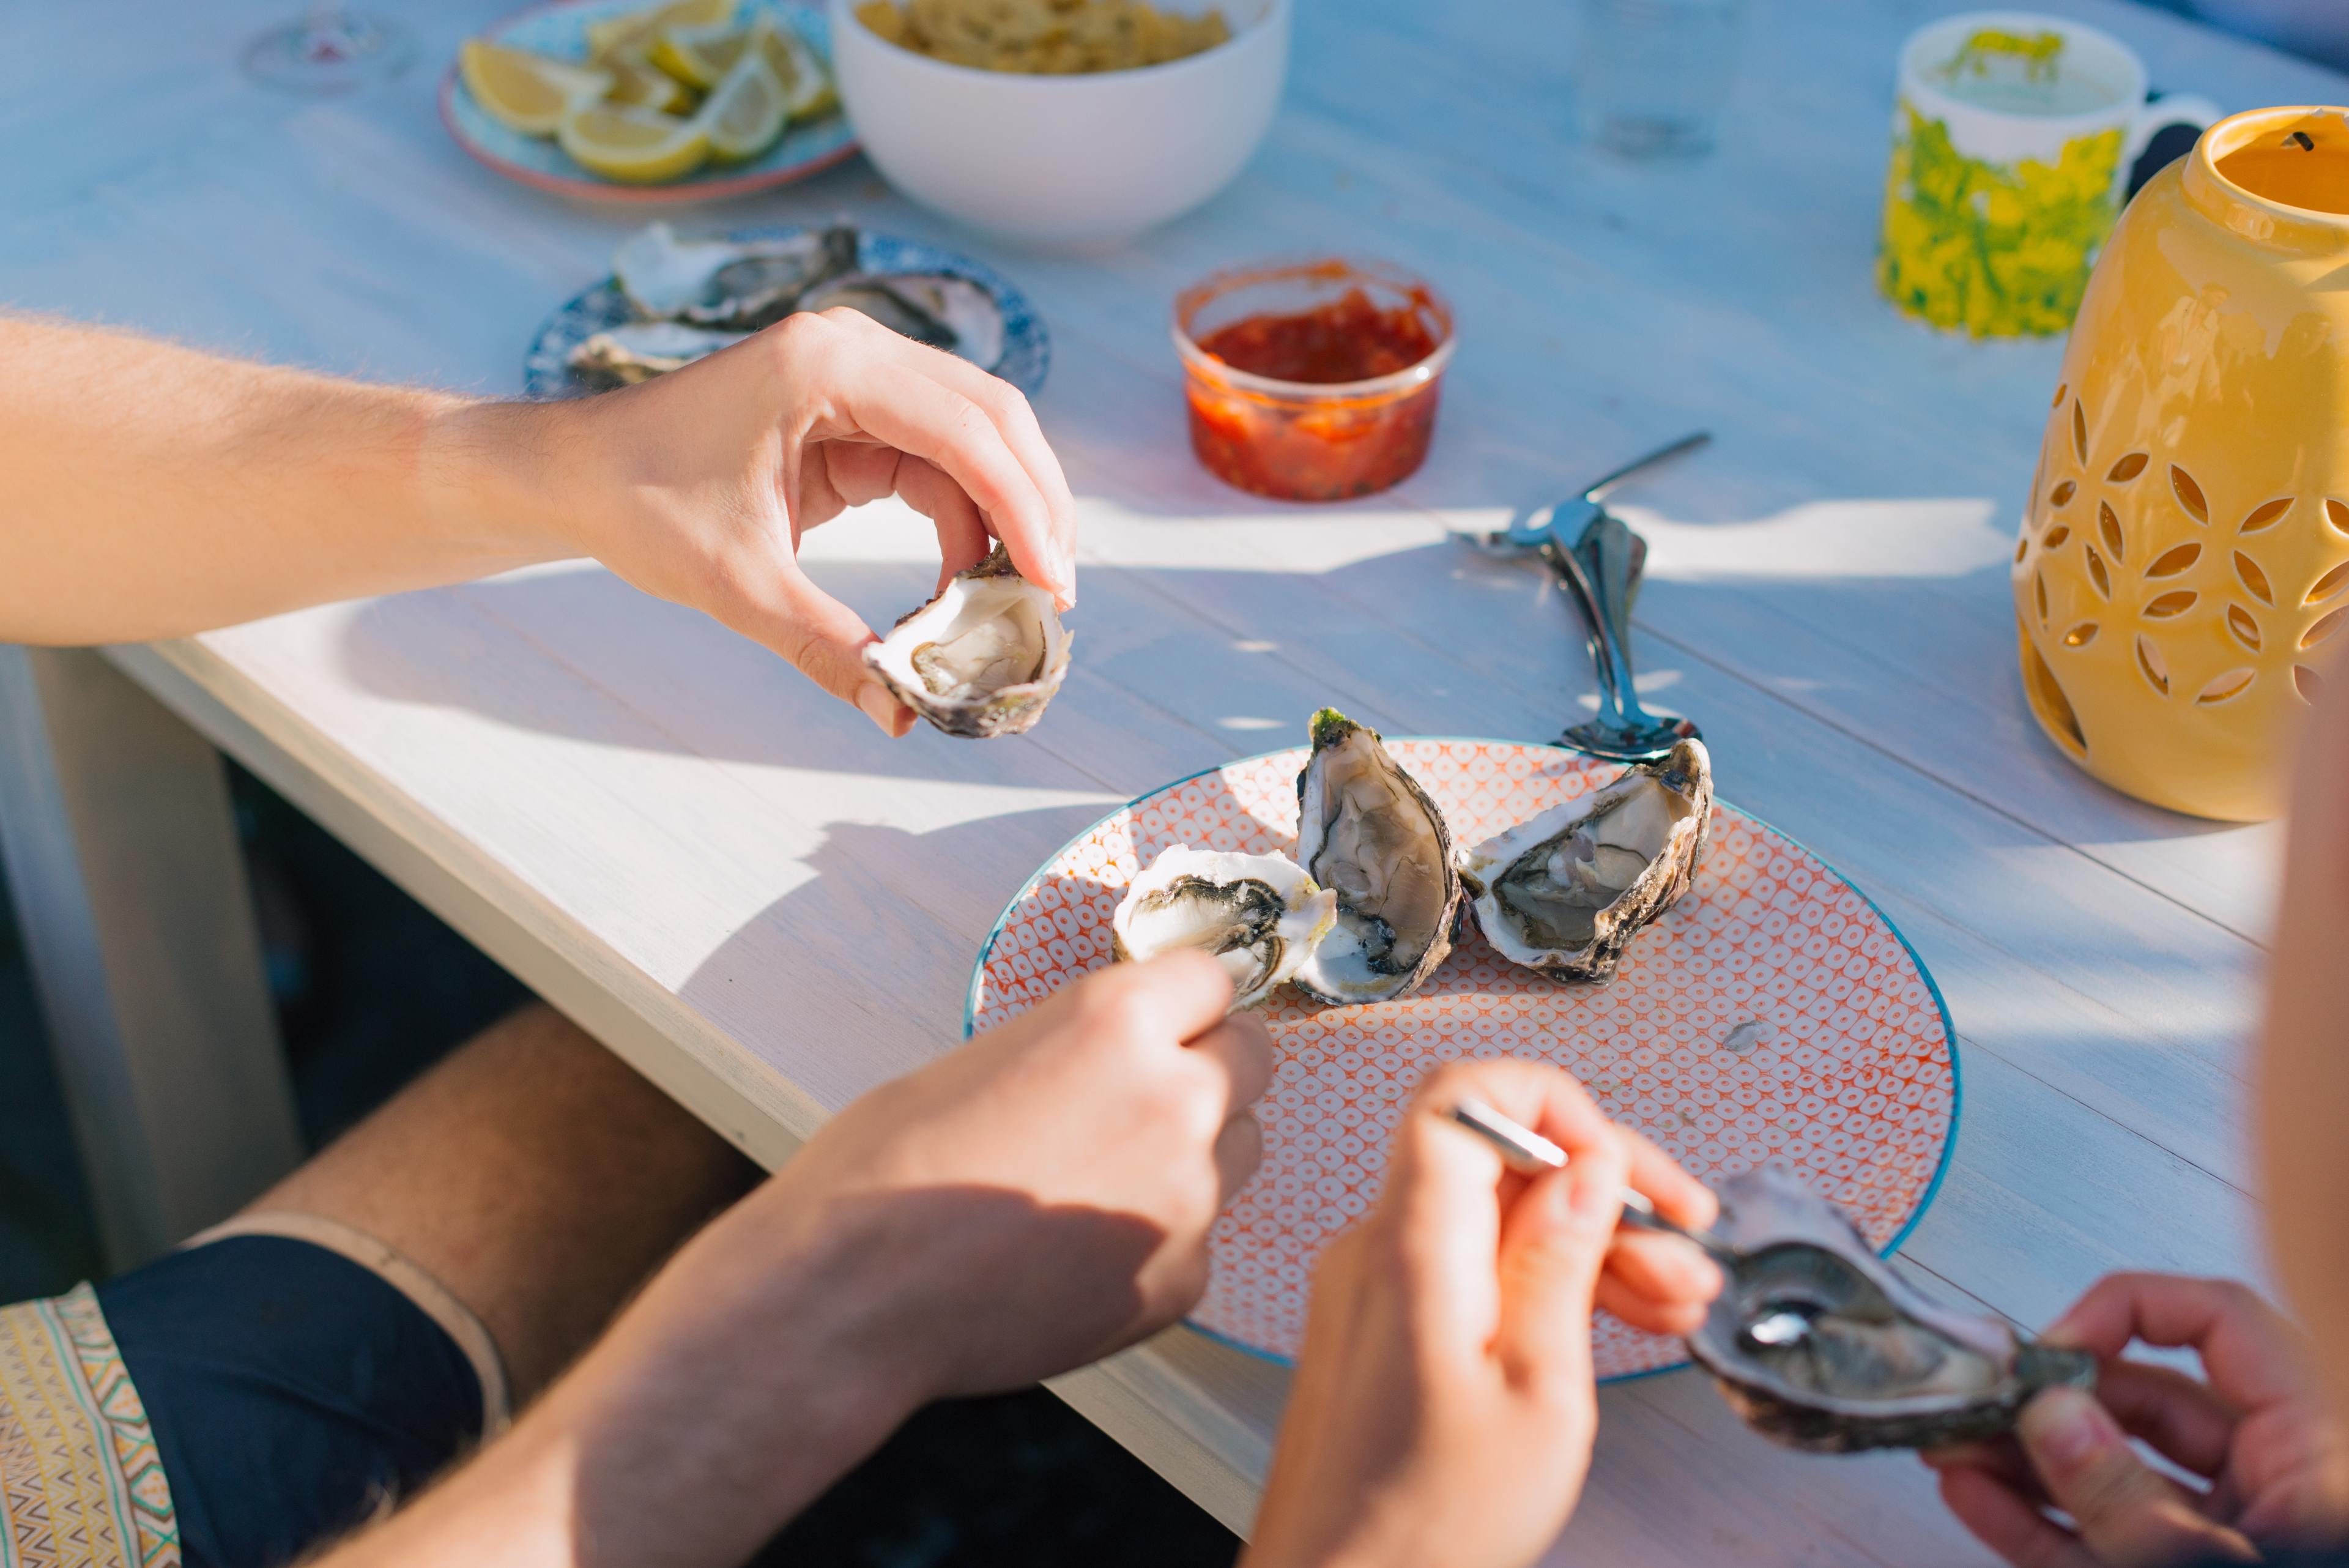 Two people shuck and eat oysters on a picnic table in the setting sun.